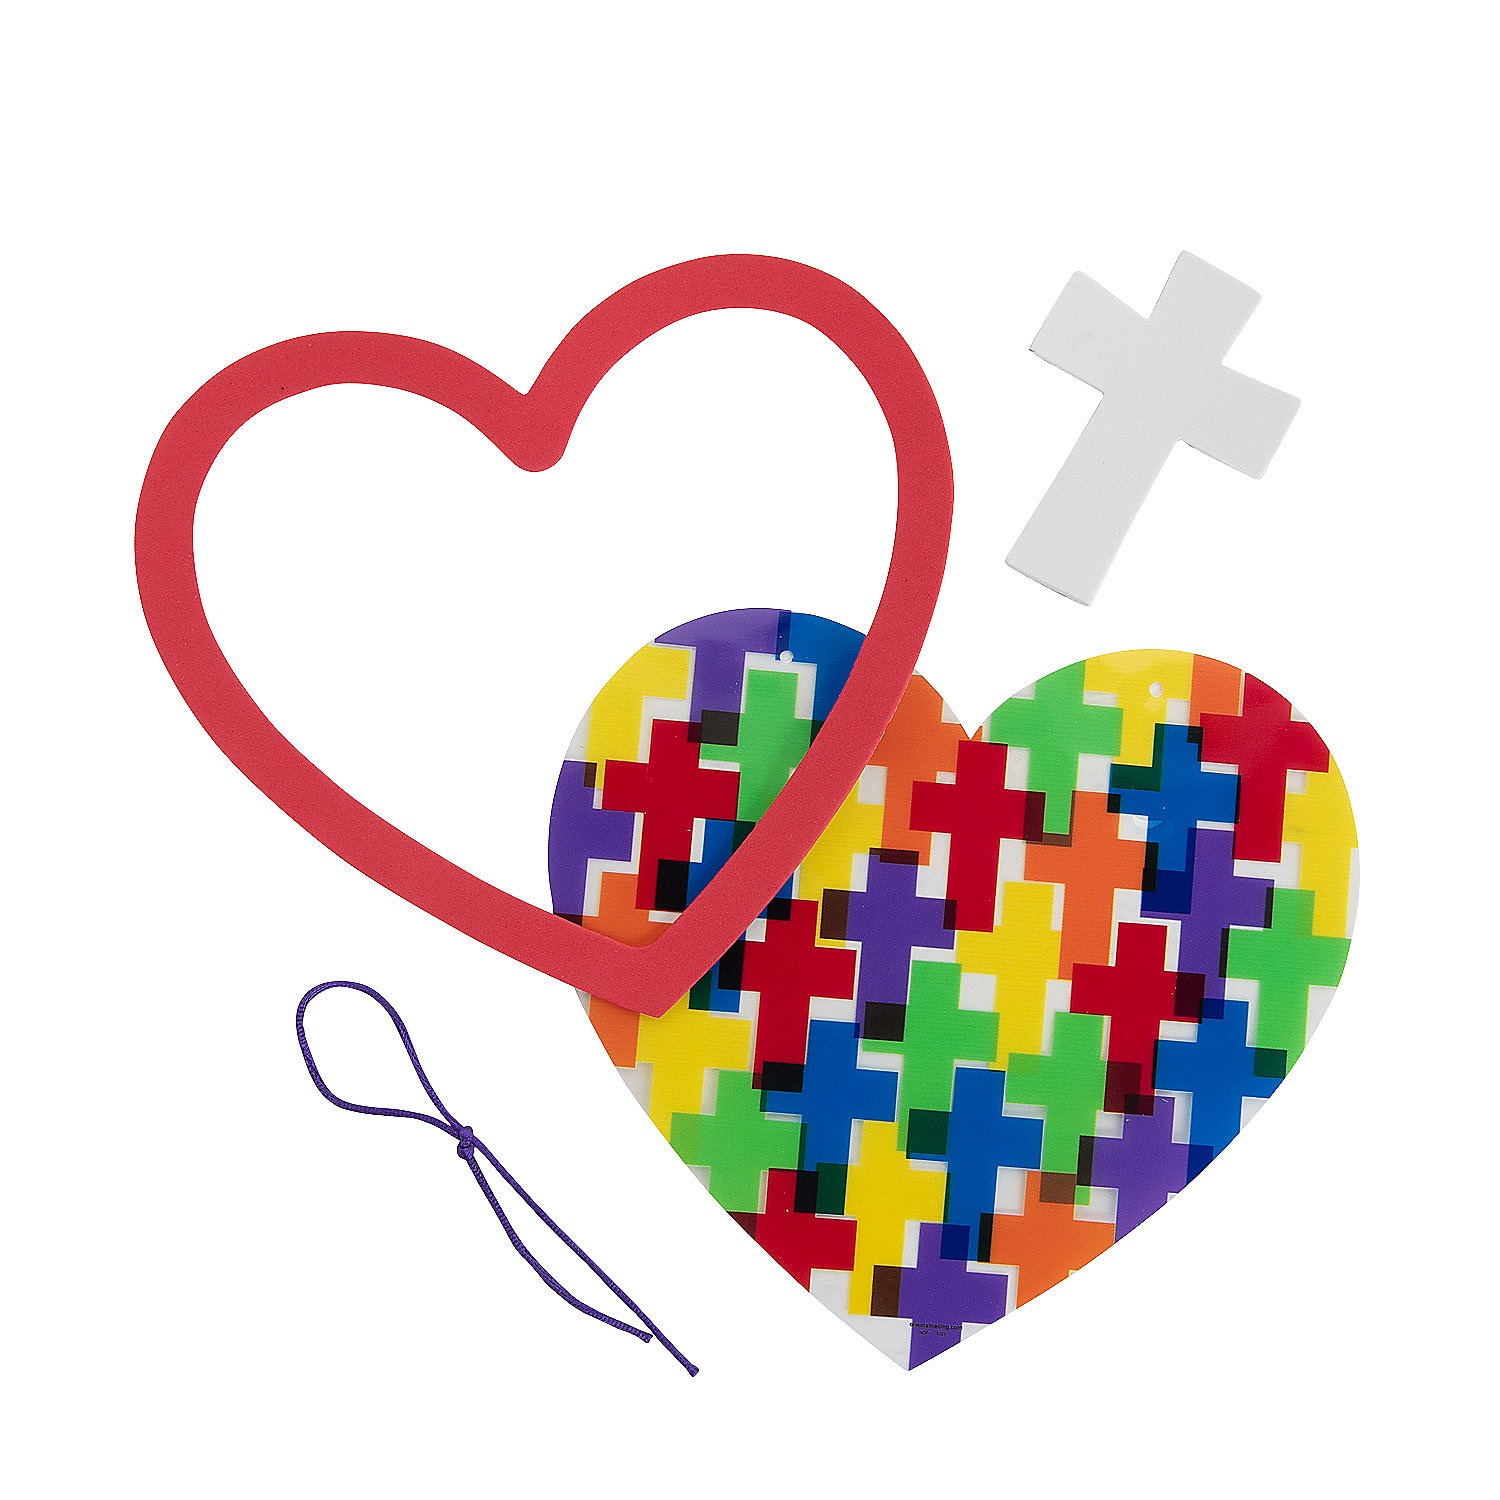 religious-heart-with-crosses-sign-craft-kit-makes-12_14097402-a01